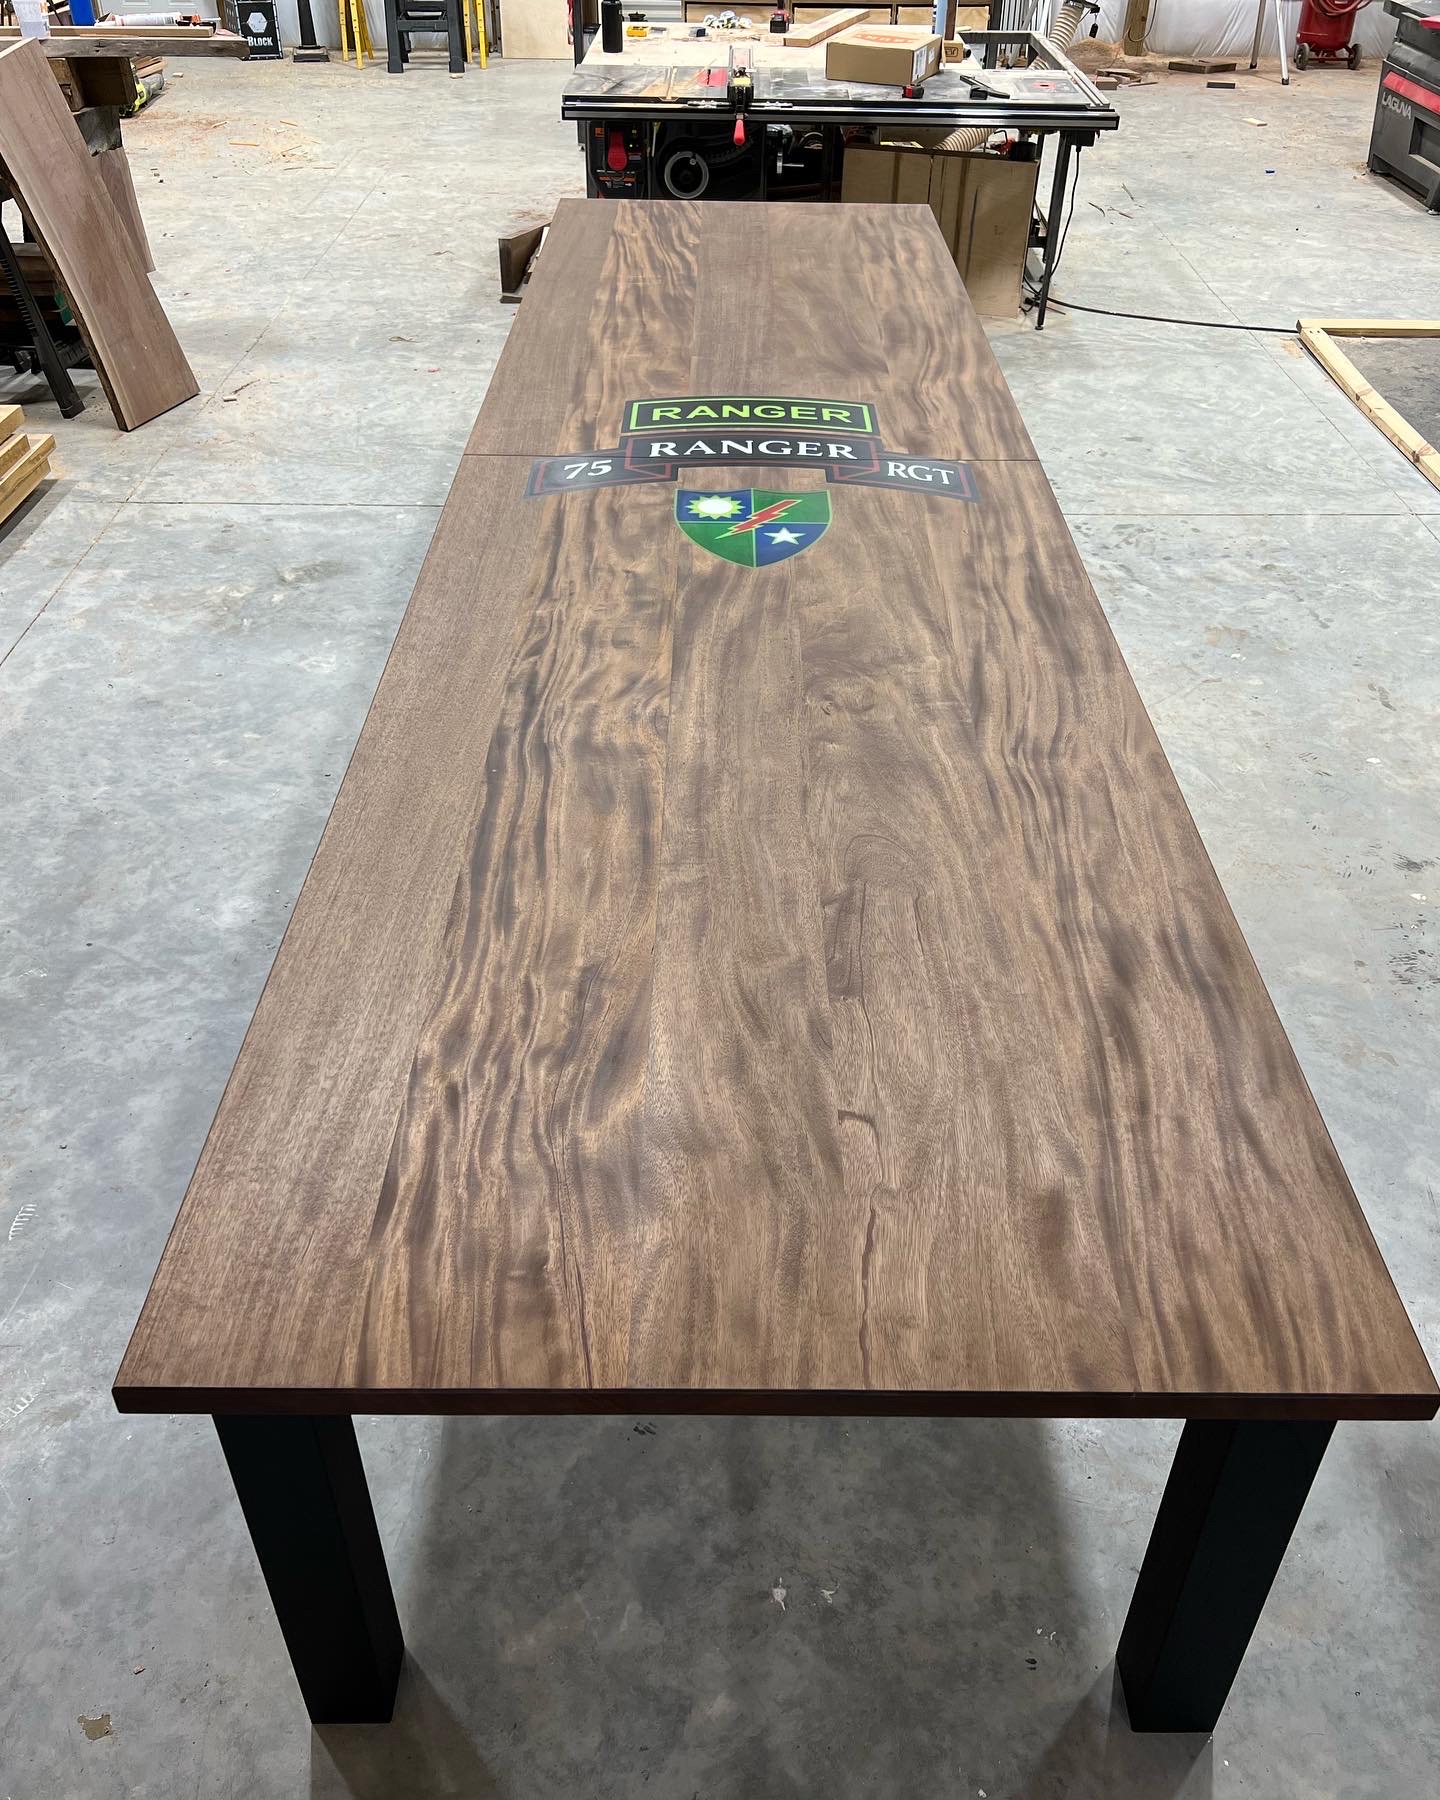 Army Ranger Conference Table Johnson Company Woodworking Johnson